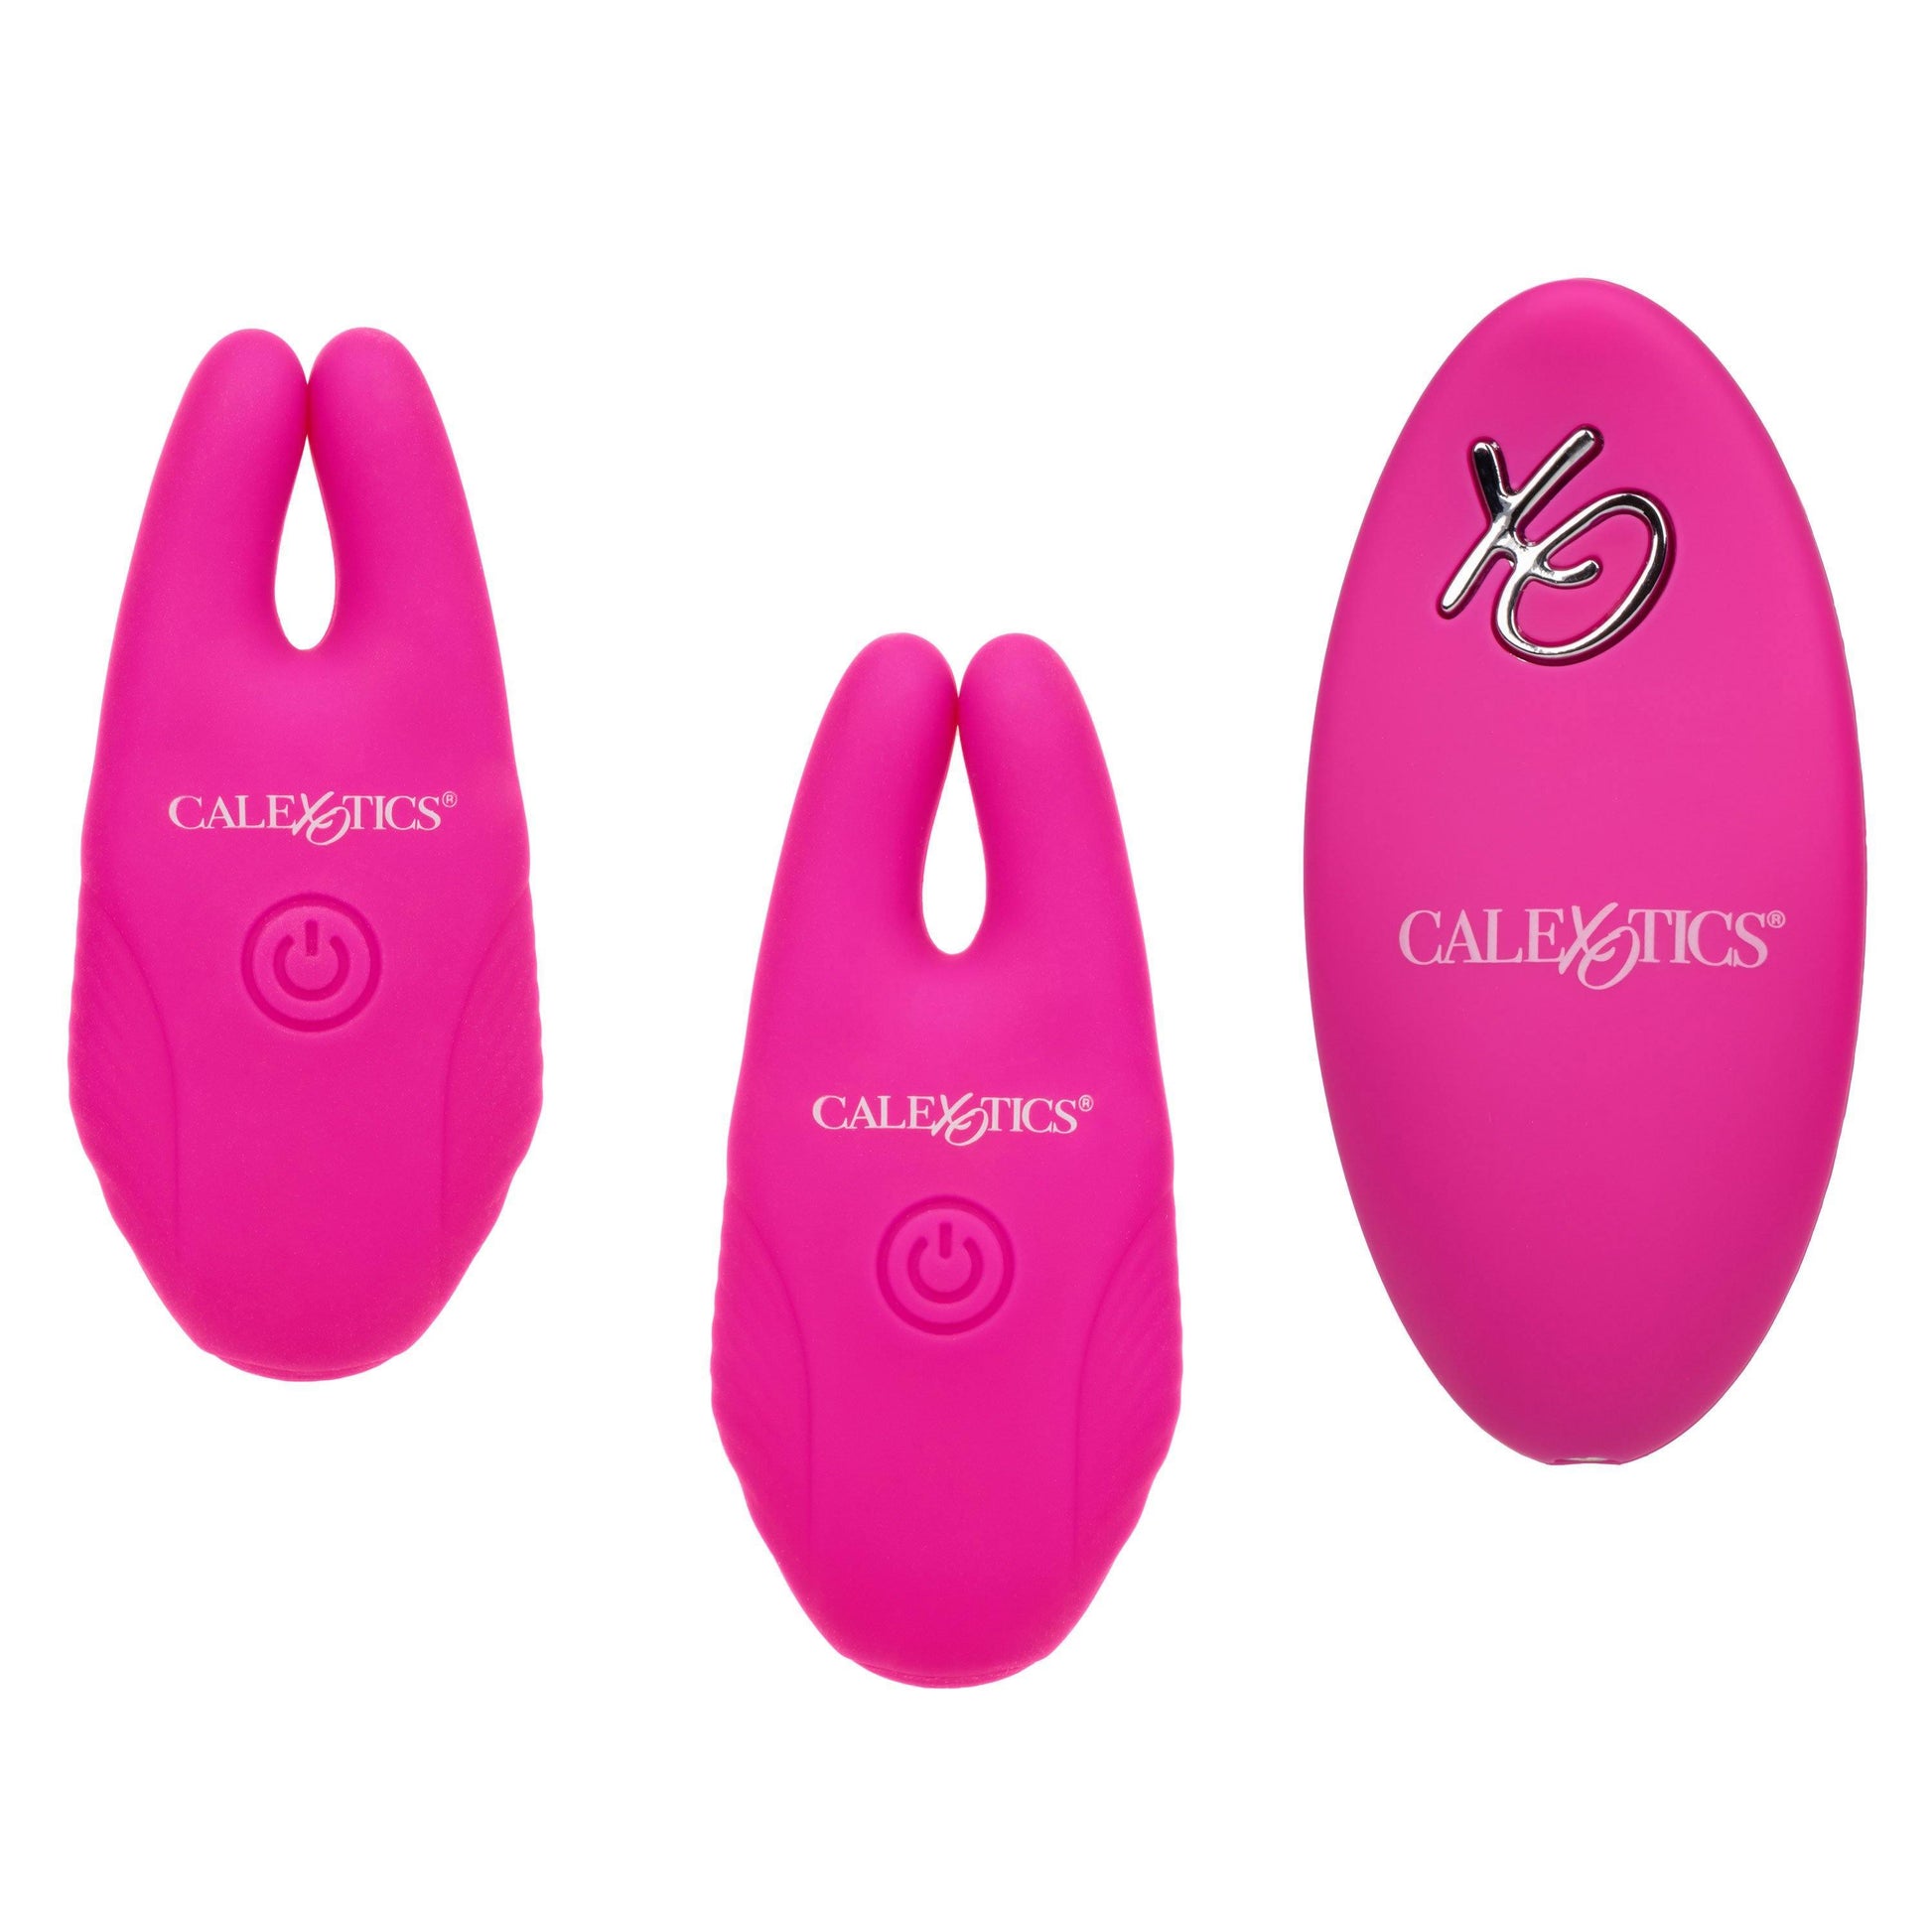 Silicone Remote Nipple Clamps - Pink - My Sex Toy Hub